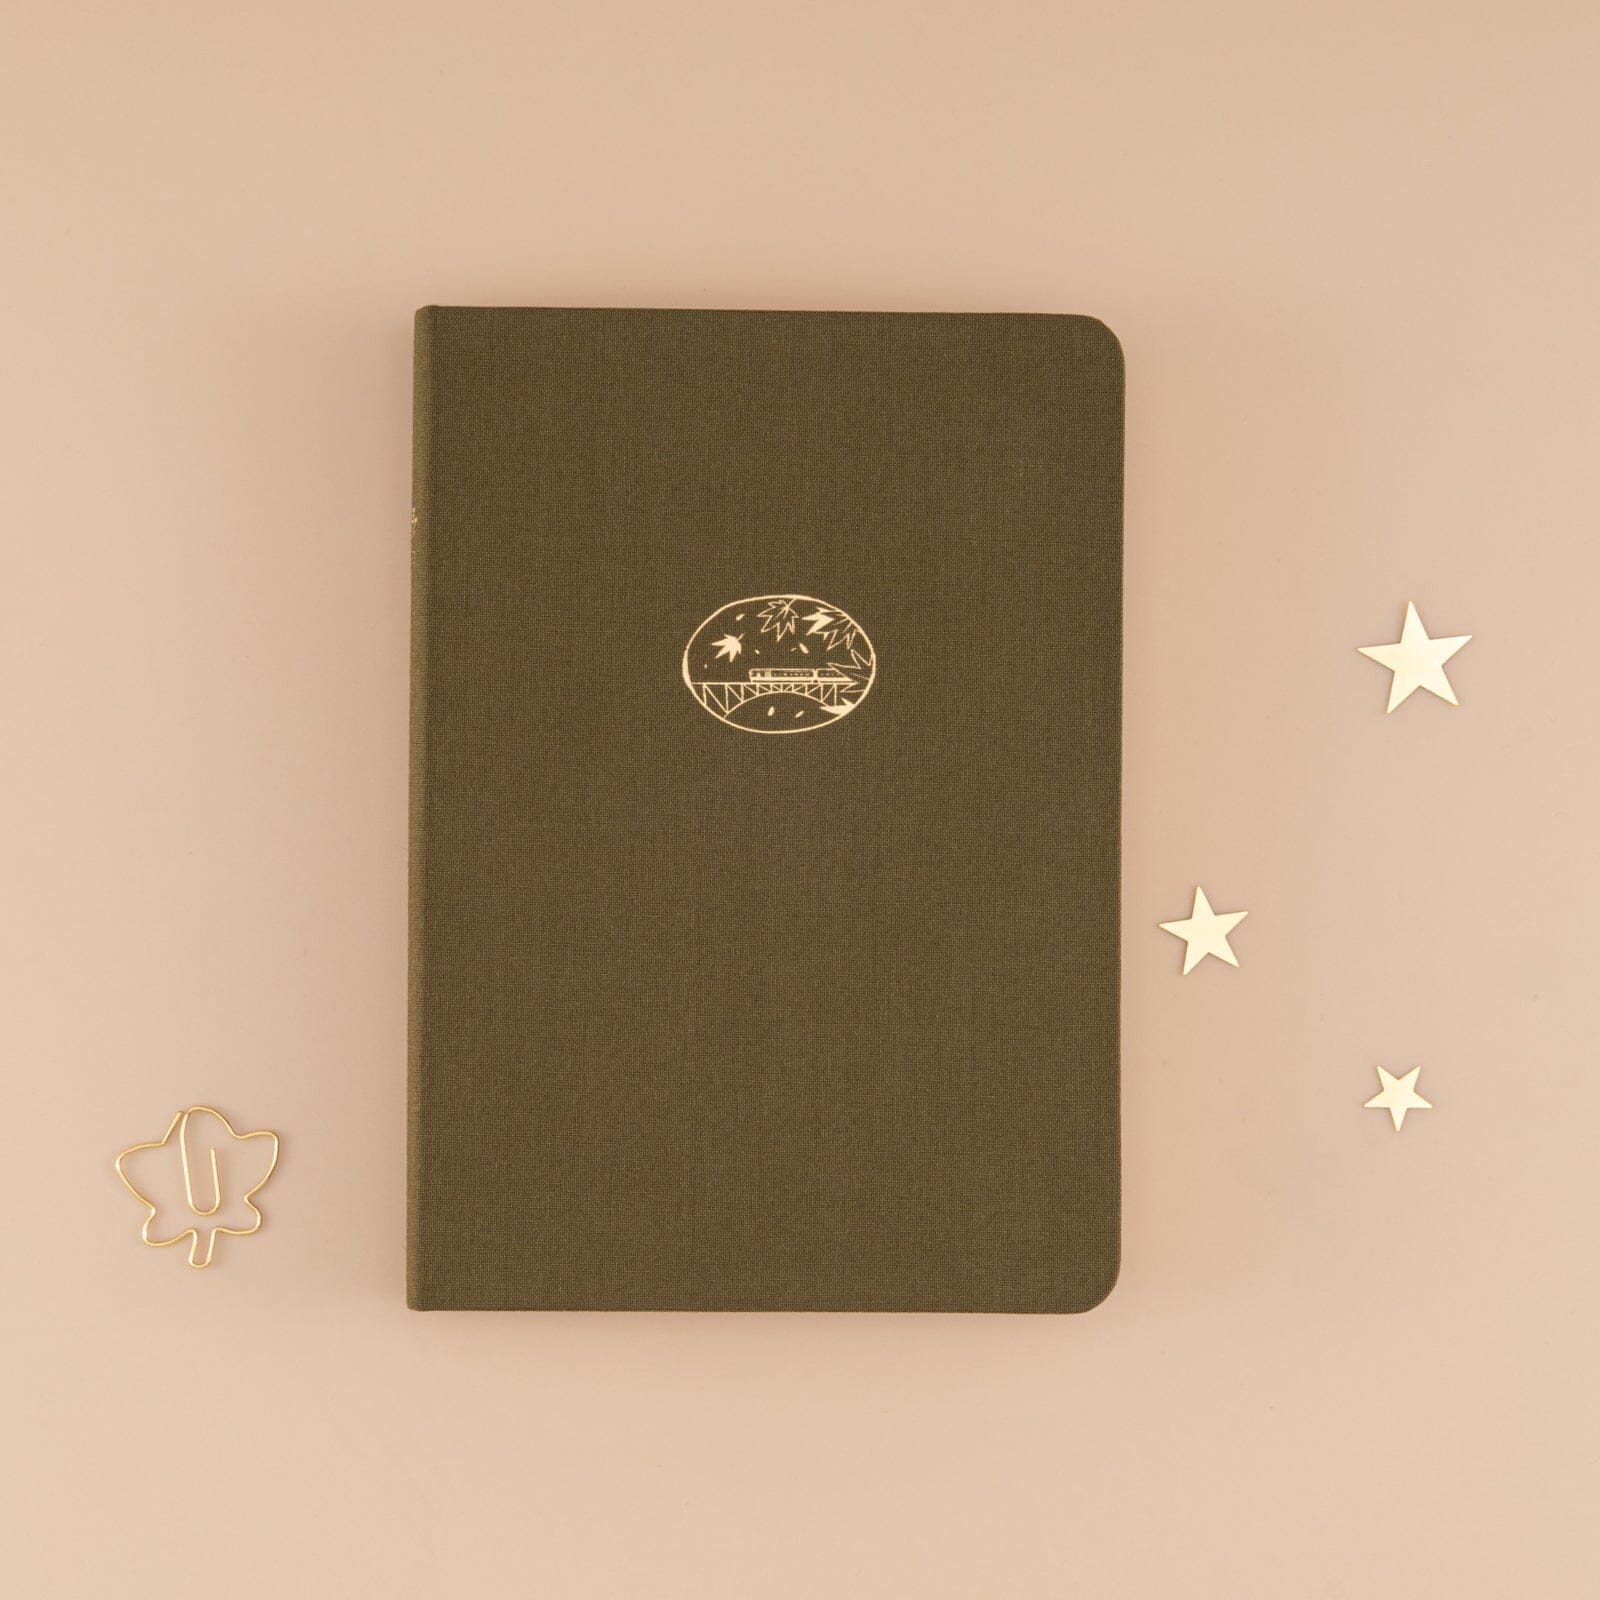 Tsuki ‘Maple Journey’ Limited Edition Bullet Journal ☾